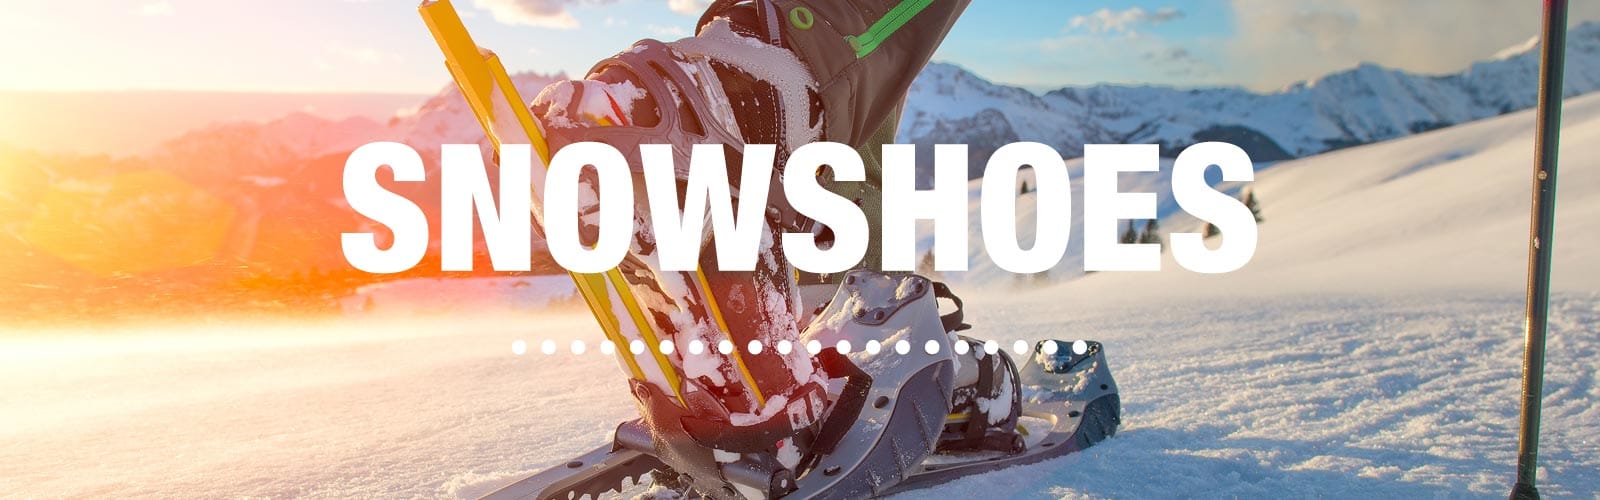 Is there a chart listing snowshoe sizes?